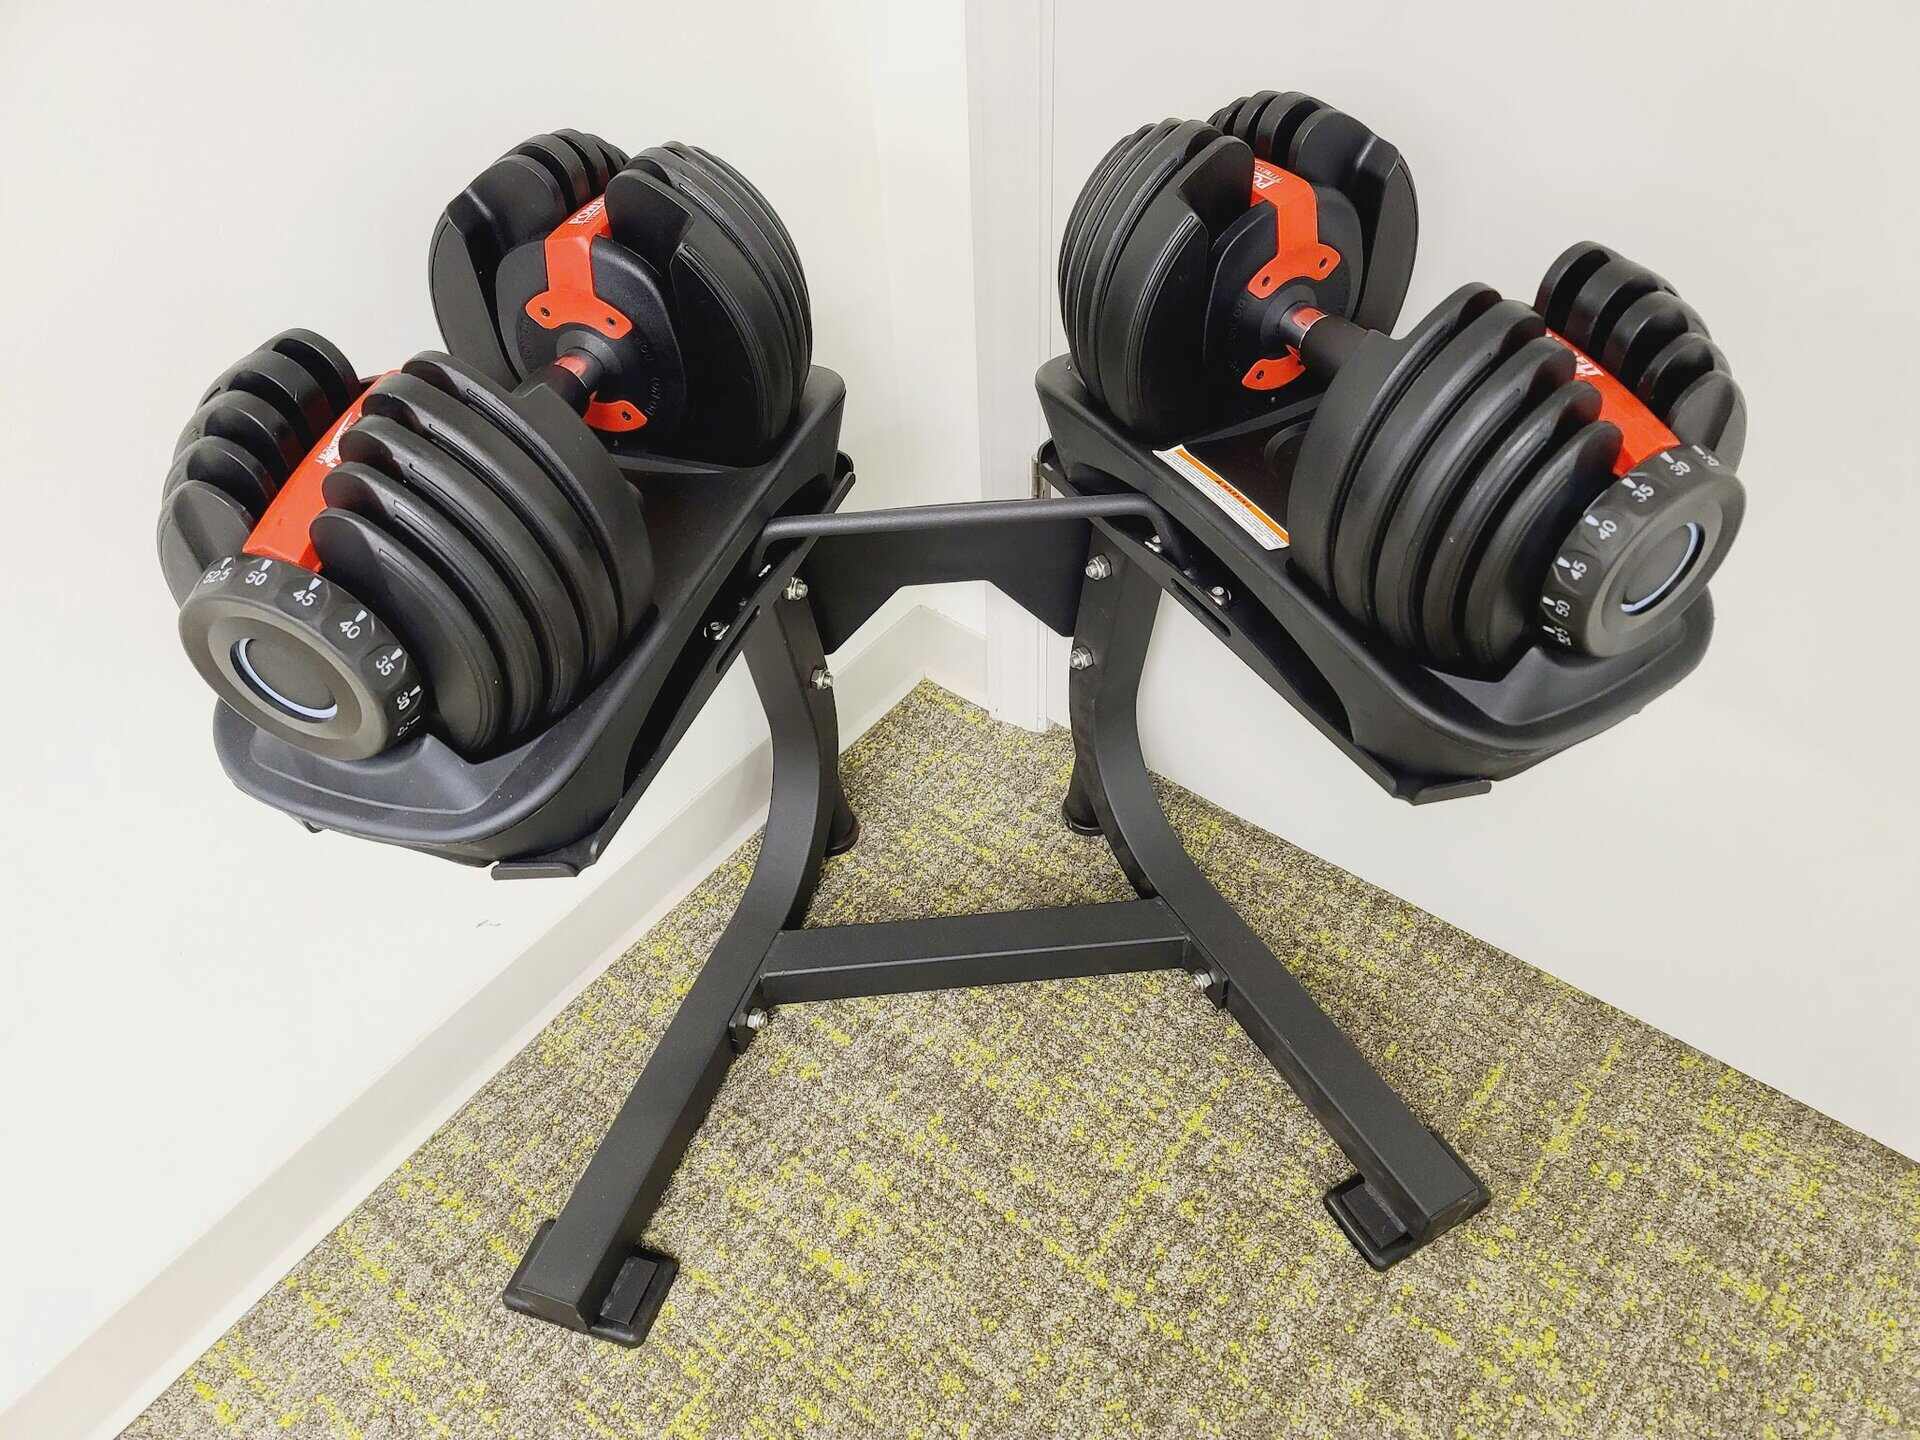 Dumbbell Set Review: The Perfect Addition to Your Home Gym